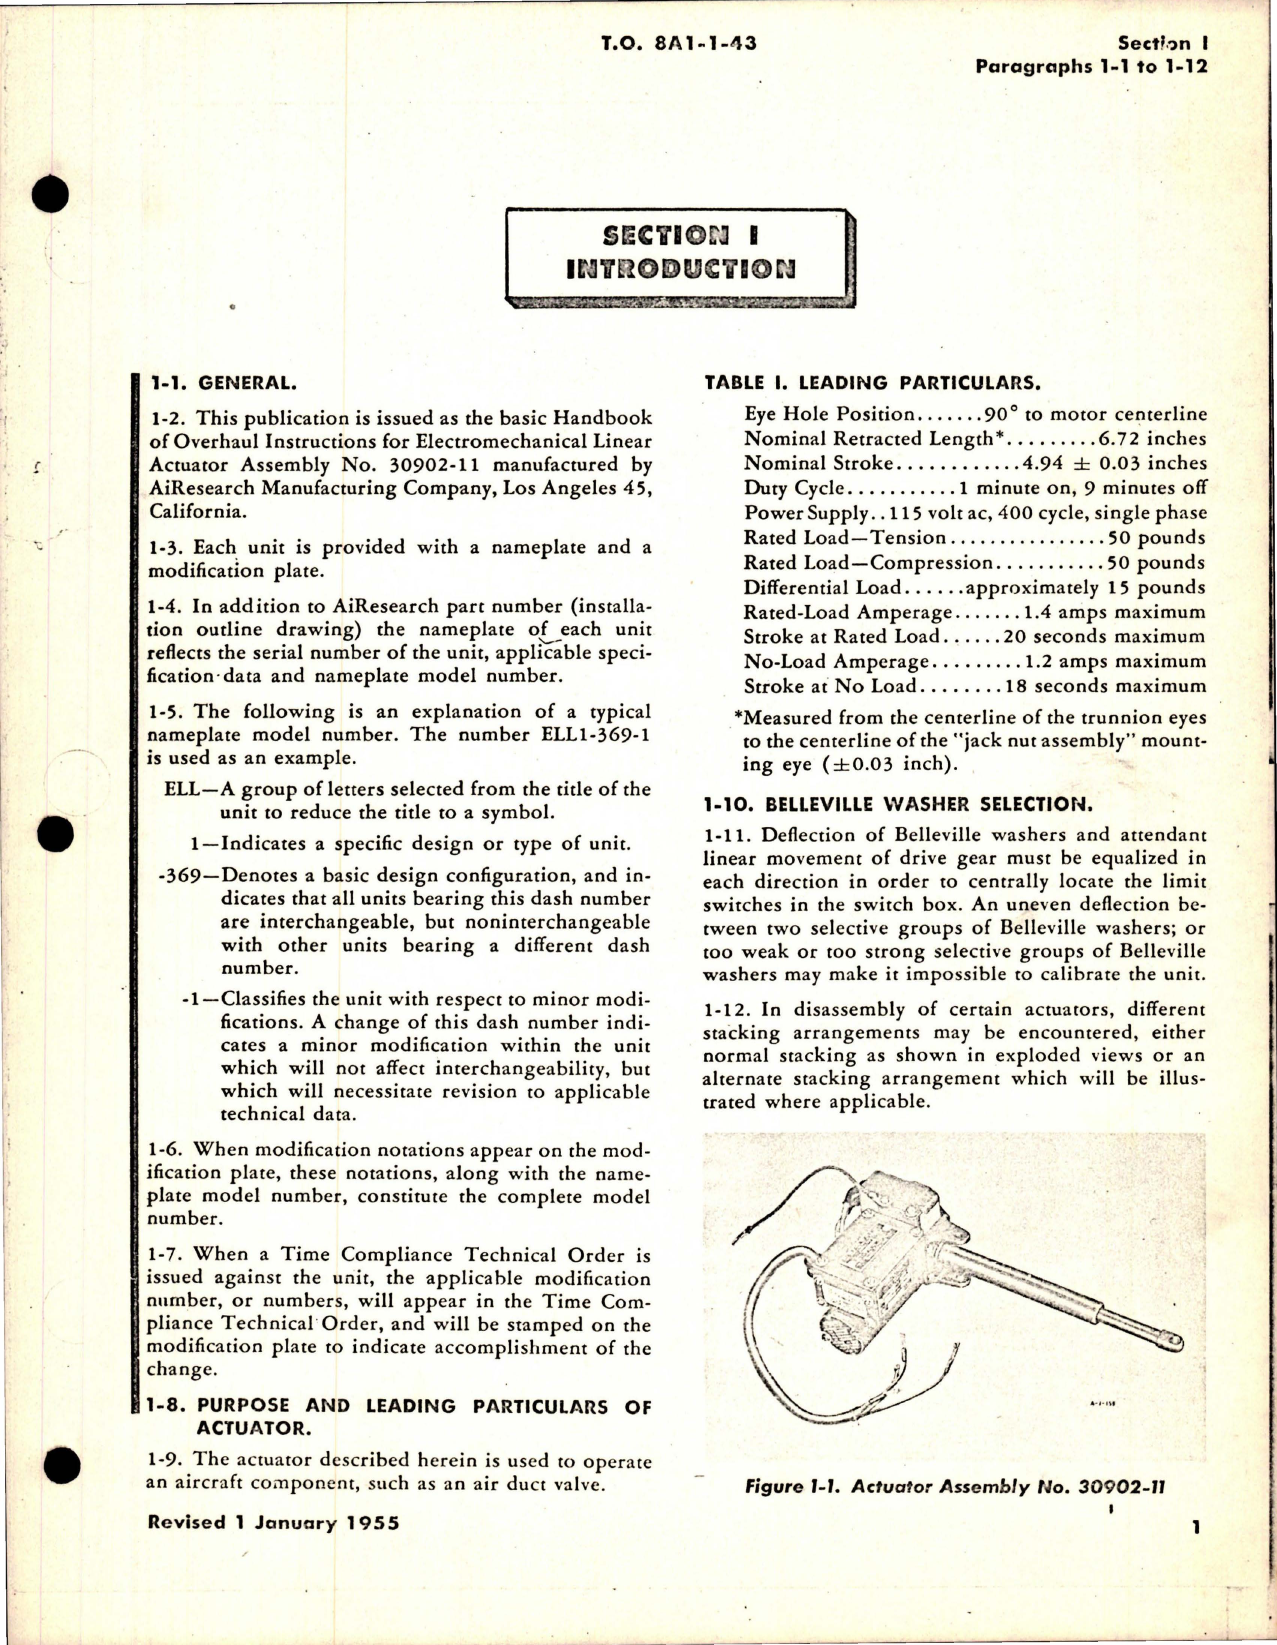 Sample page 7 from AirCorps Library document: Overhaul Instructions for Electromechanical Linear Actuators  - 30902-11